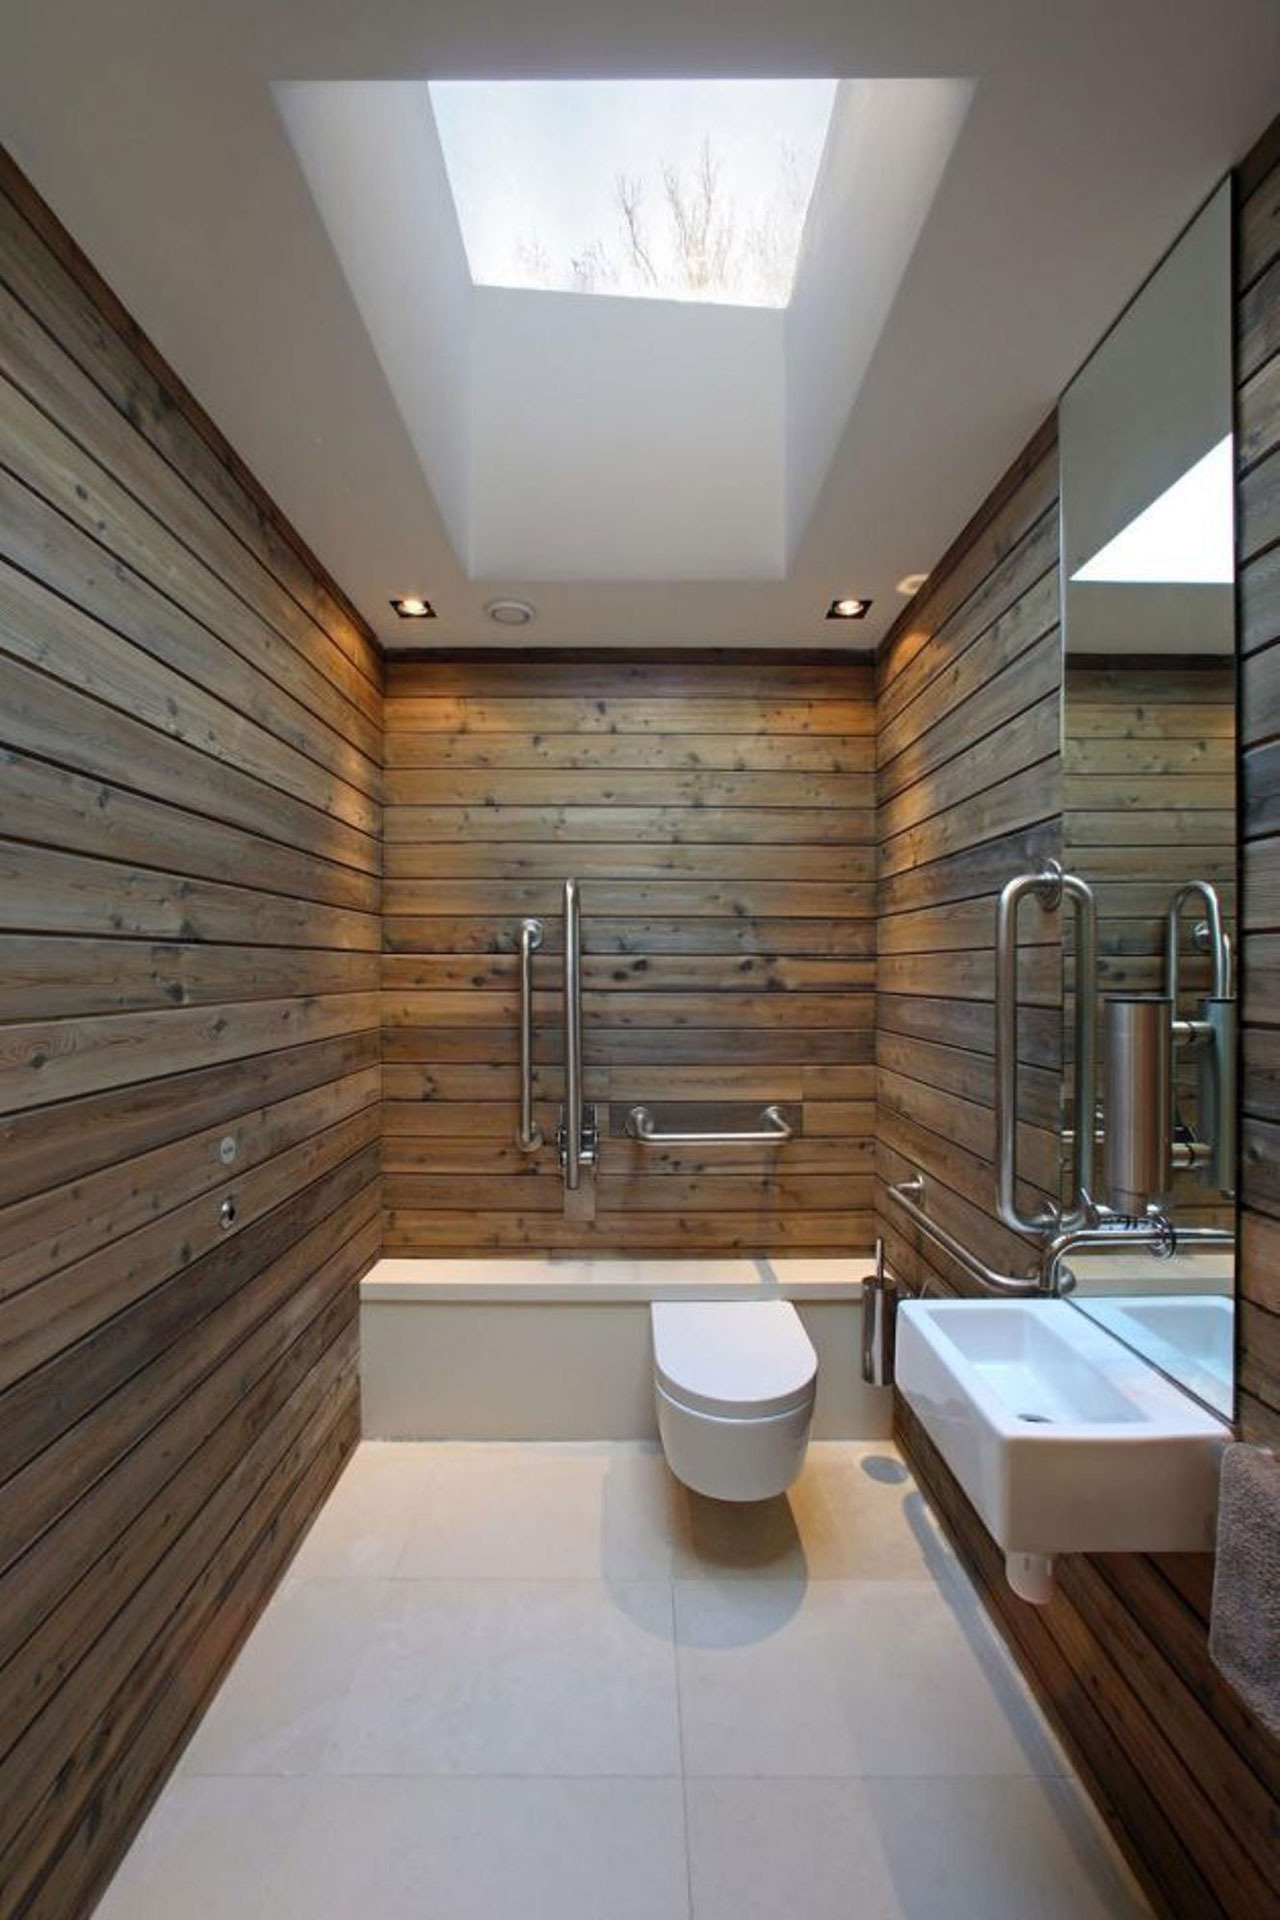 Contemporary Bathroom Wall Enchanting Contemporary Bathroom Applying Wooden Wall Design Ideas Completed With Bidet And Wall Sink Coupled By Mirror And Furnished With Bathroom Fixtures Bathroom Decorating Bathroom With Bathroom Fixtures